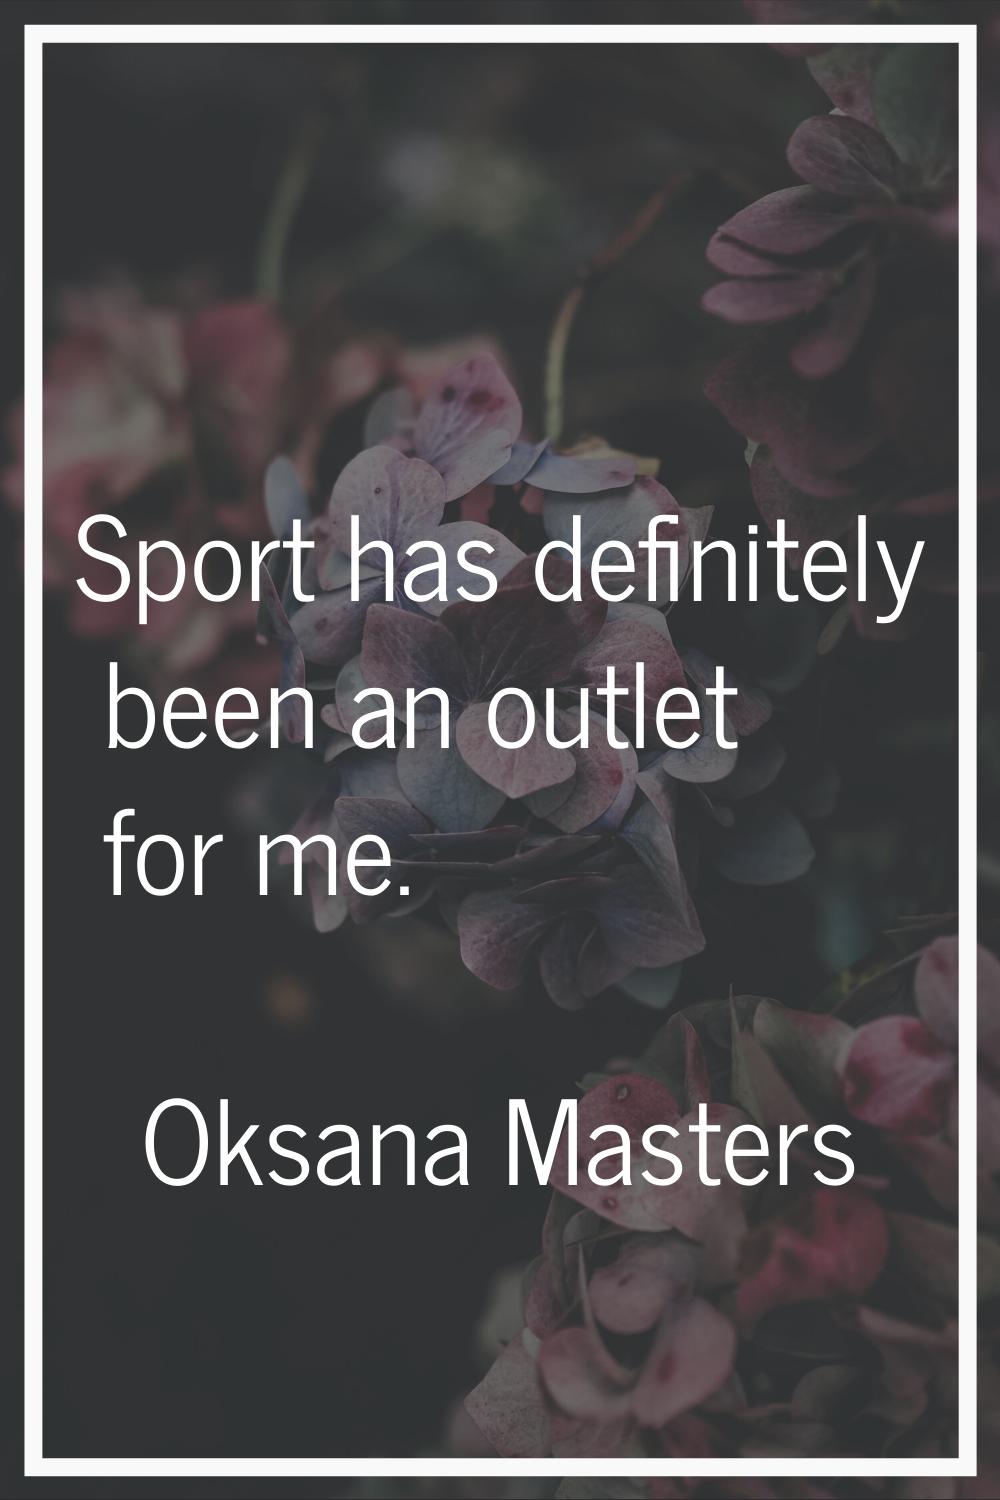 Sport has definitely been an outlet for me.